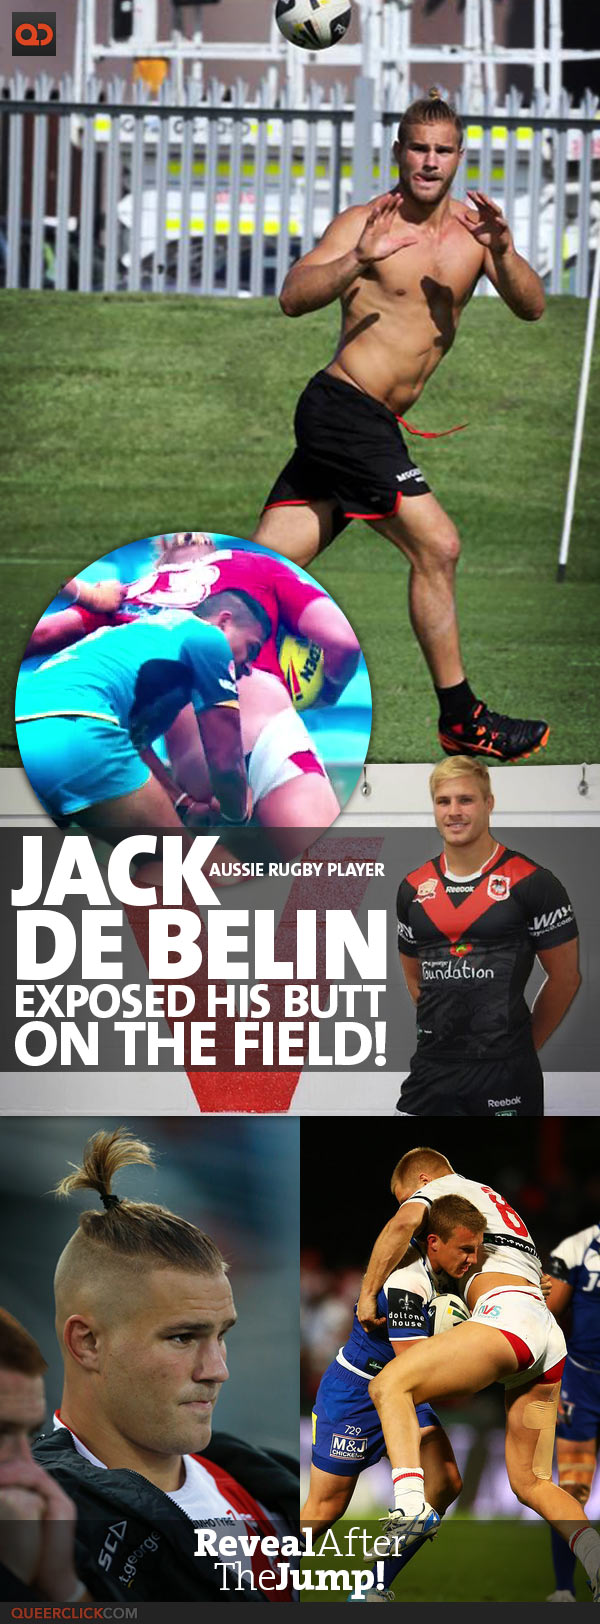 qc-aussie_rugby_player_jack_de_belin_exposed_his_butt_on_the_field-teaser